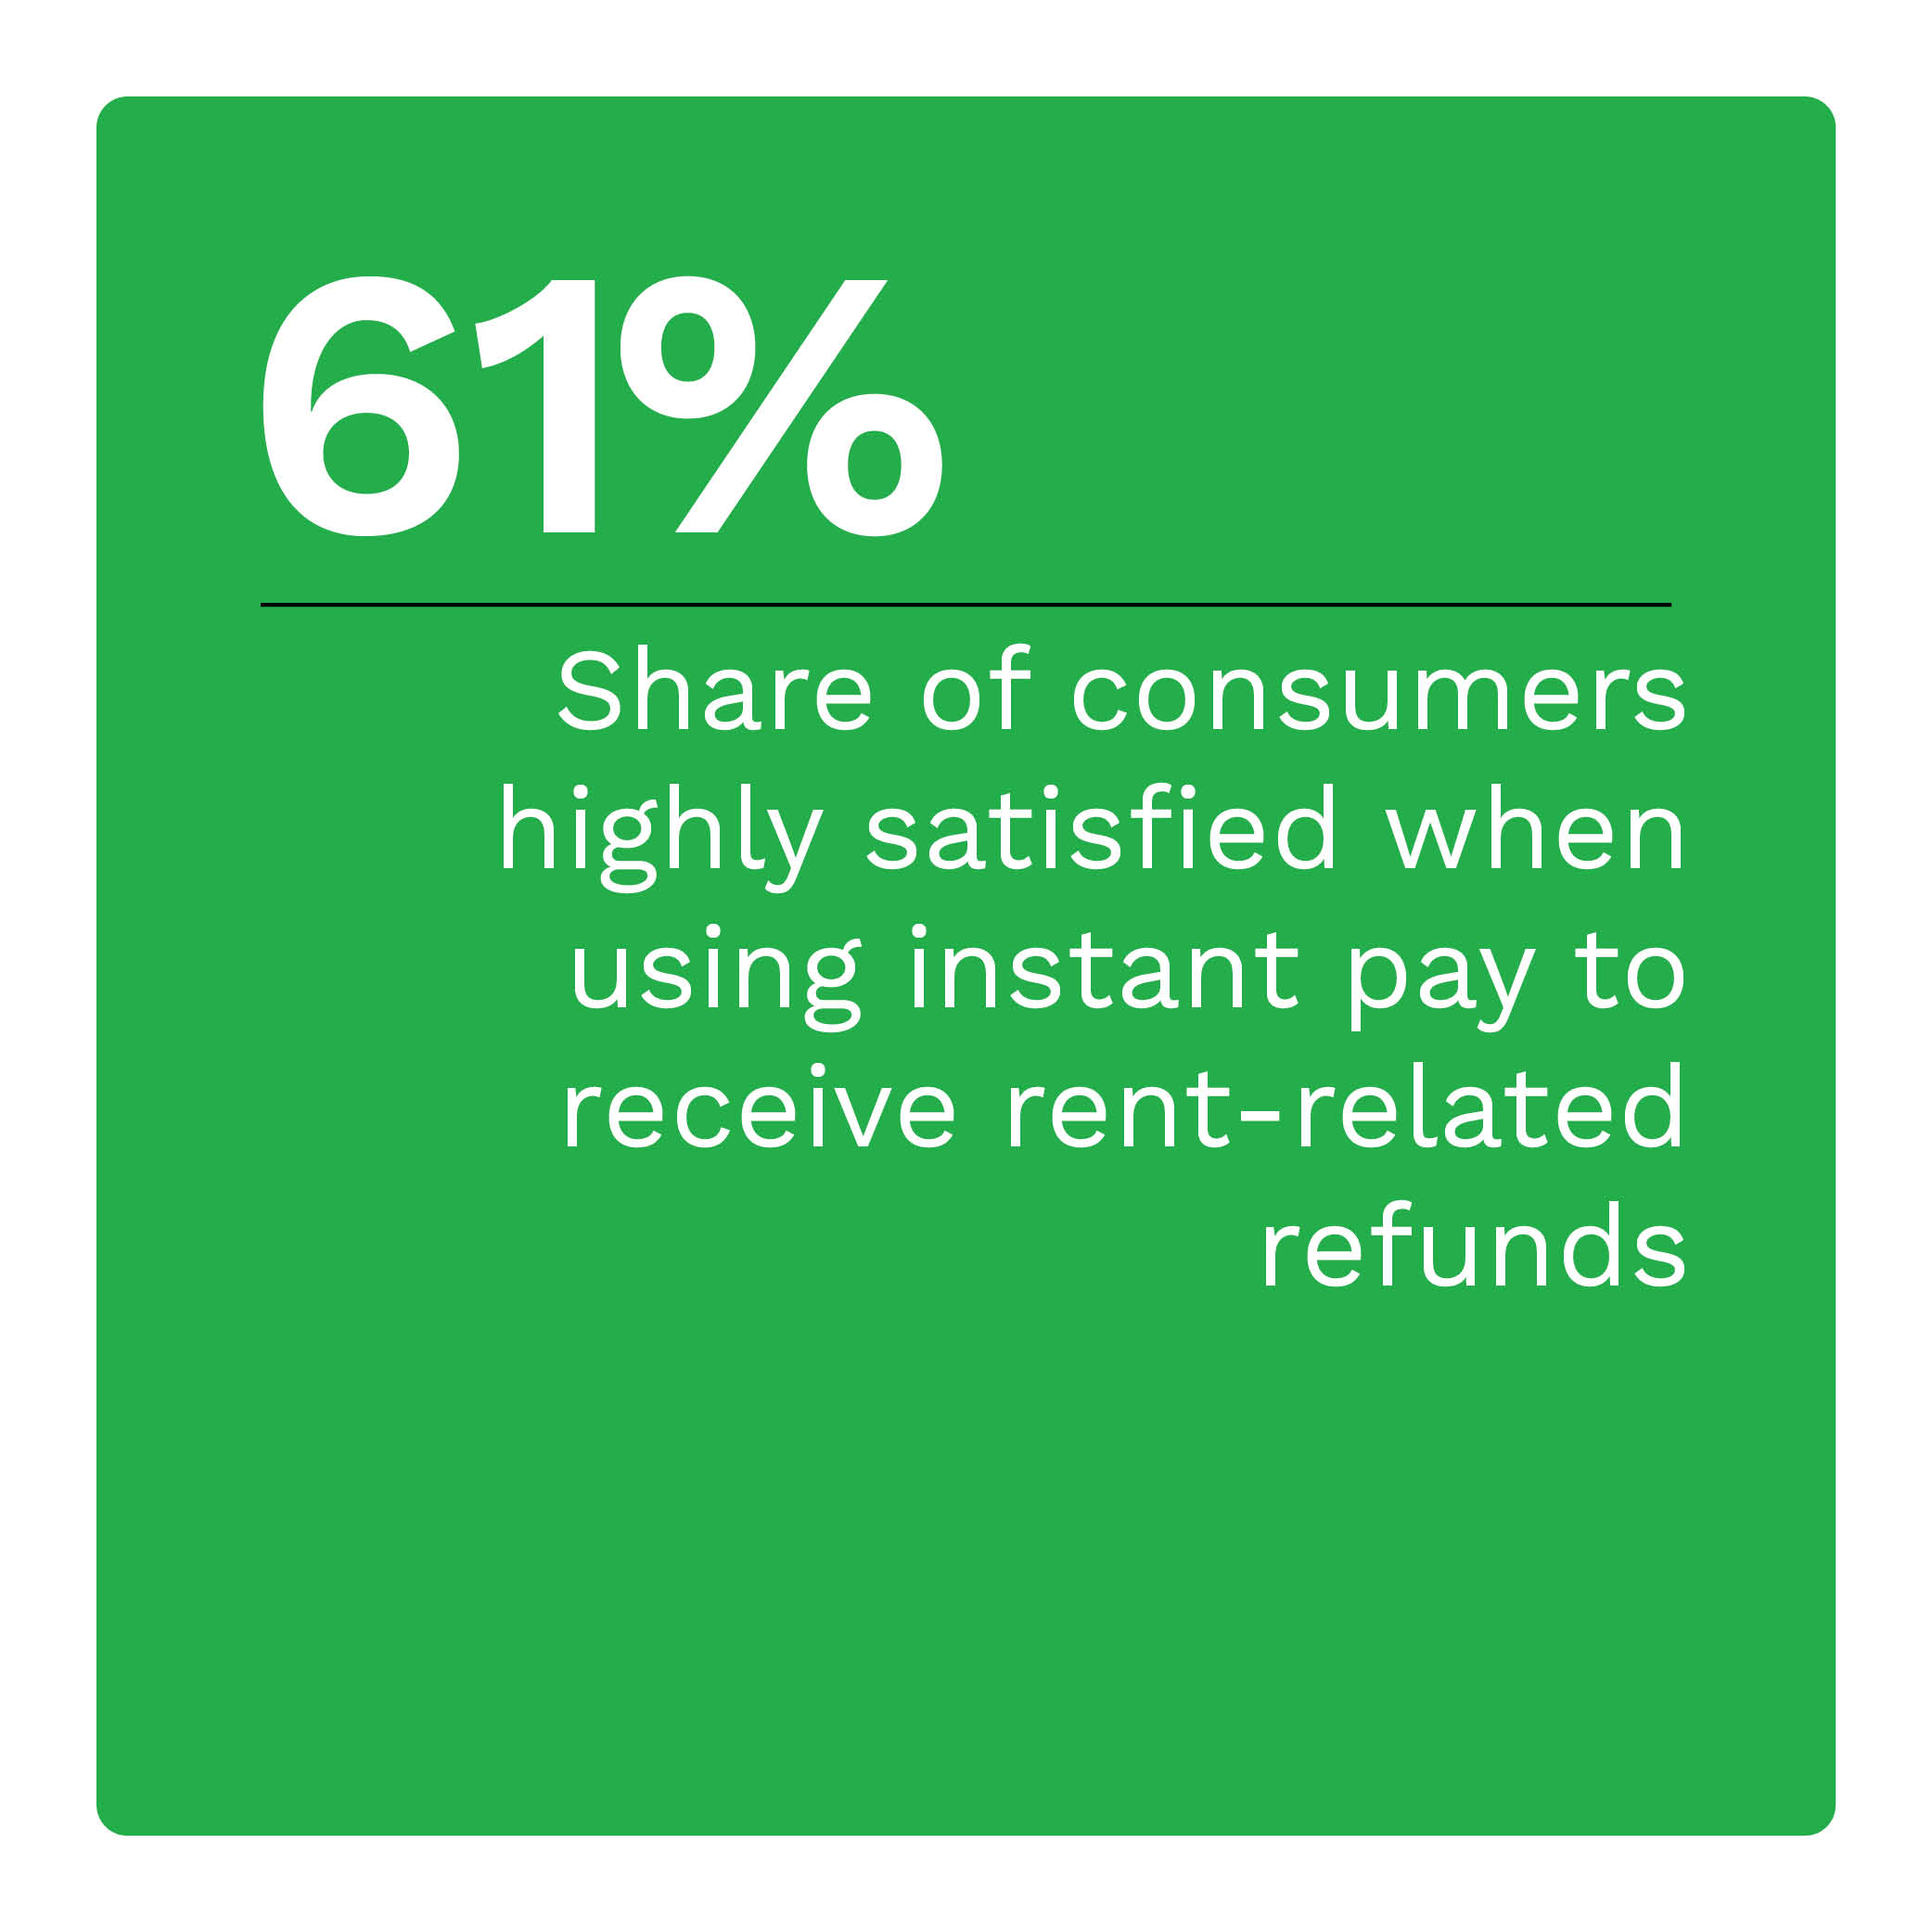 61%: Share of consumers highly satisfied when using instant pay to receive rent-related refunds